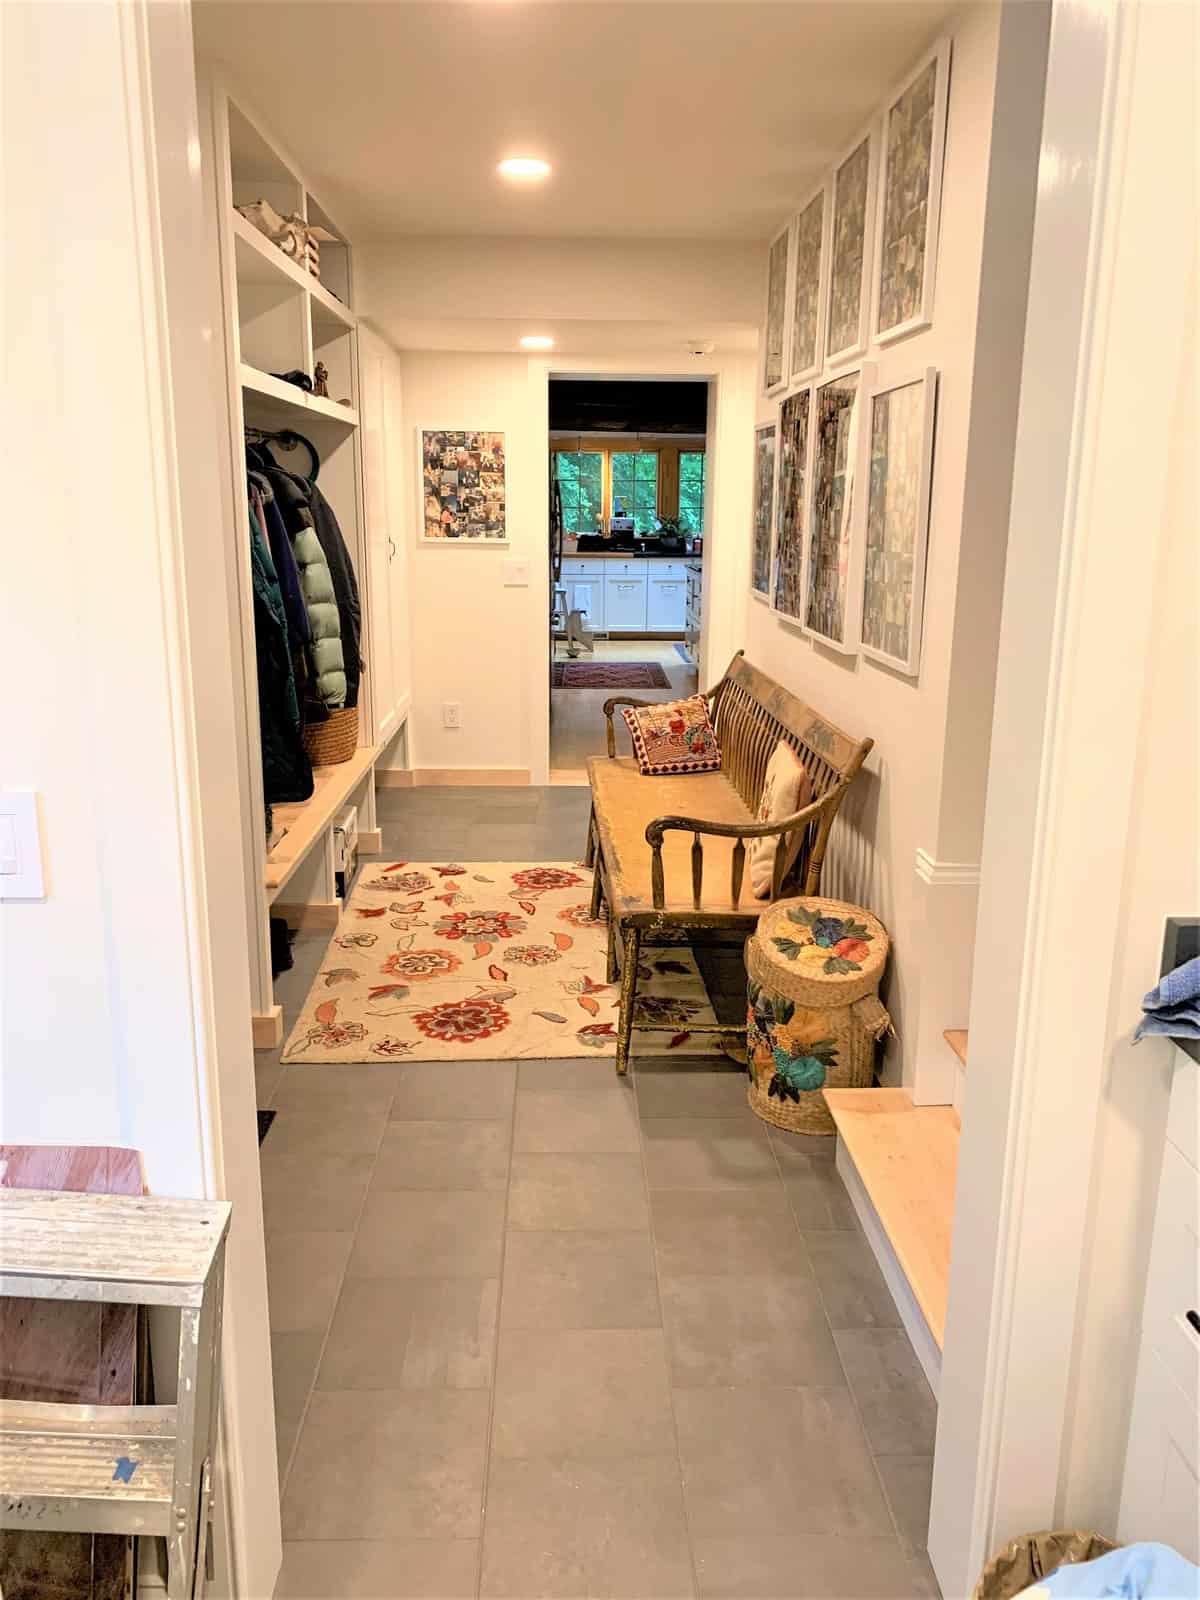 The entry includes a mudroom that can be accessed from both the old and the new spaces.